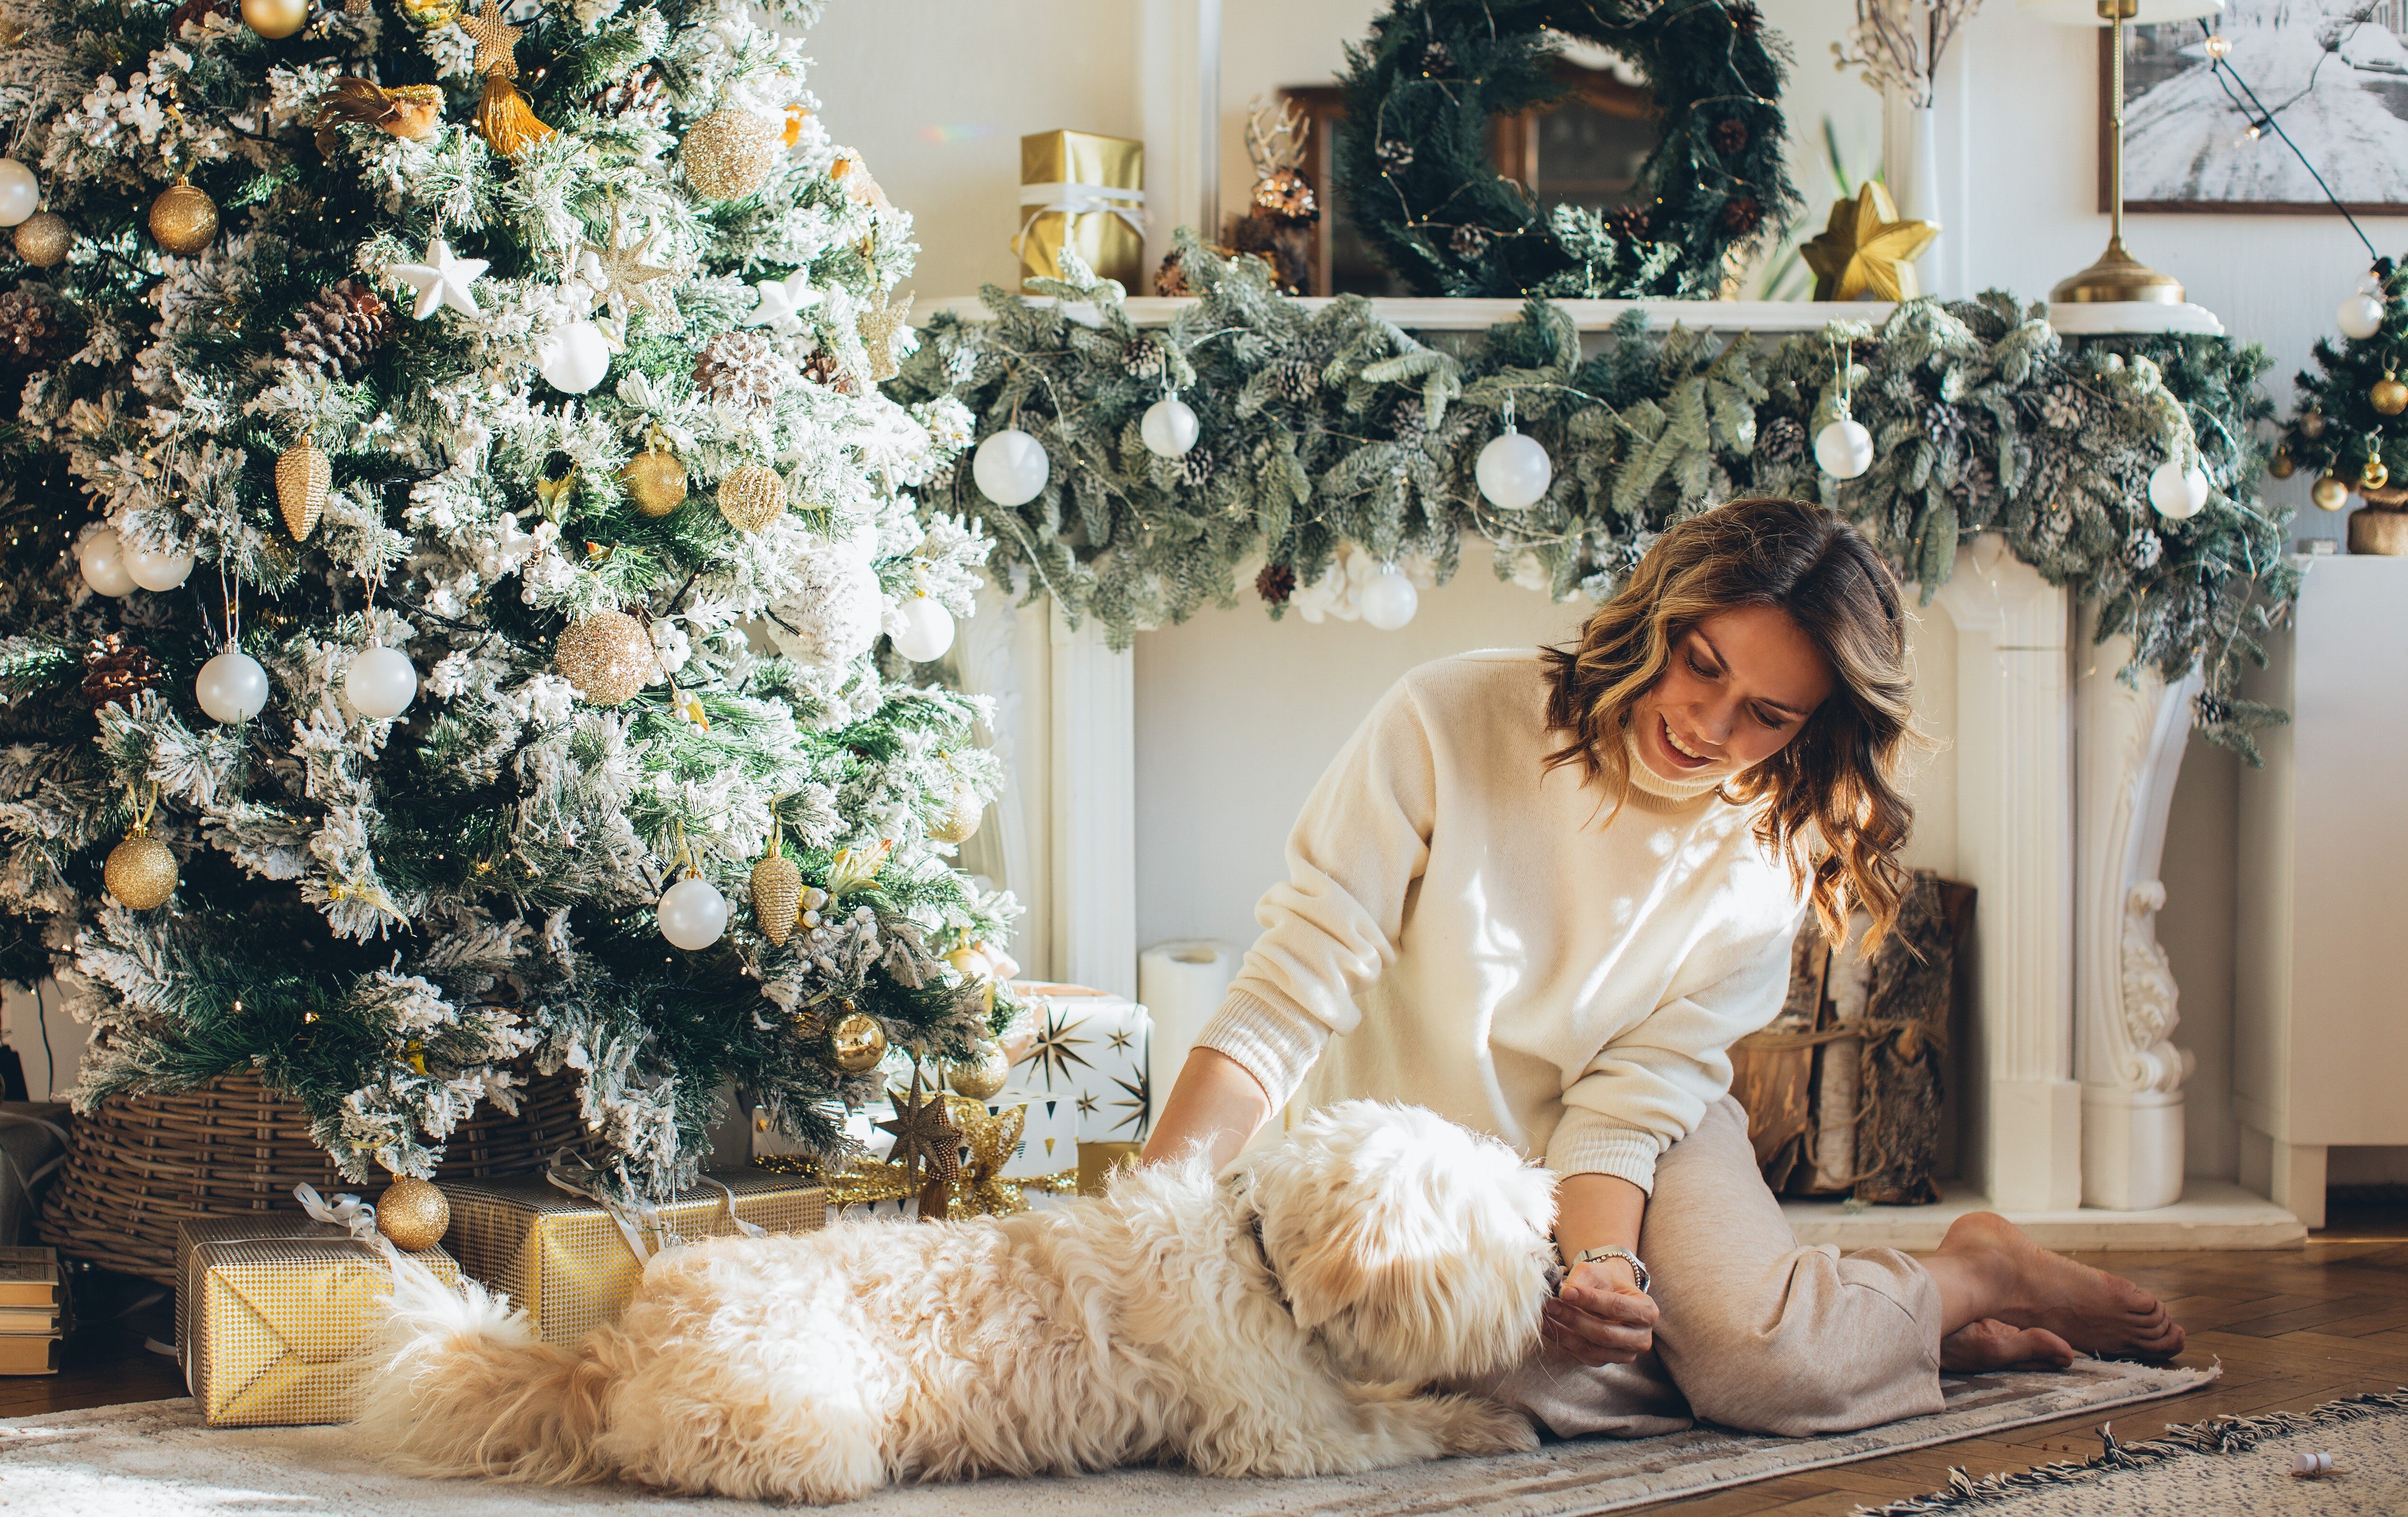 white dog sits under a Christmas tree opening a present with a young woman on Christmas morning